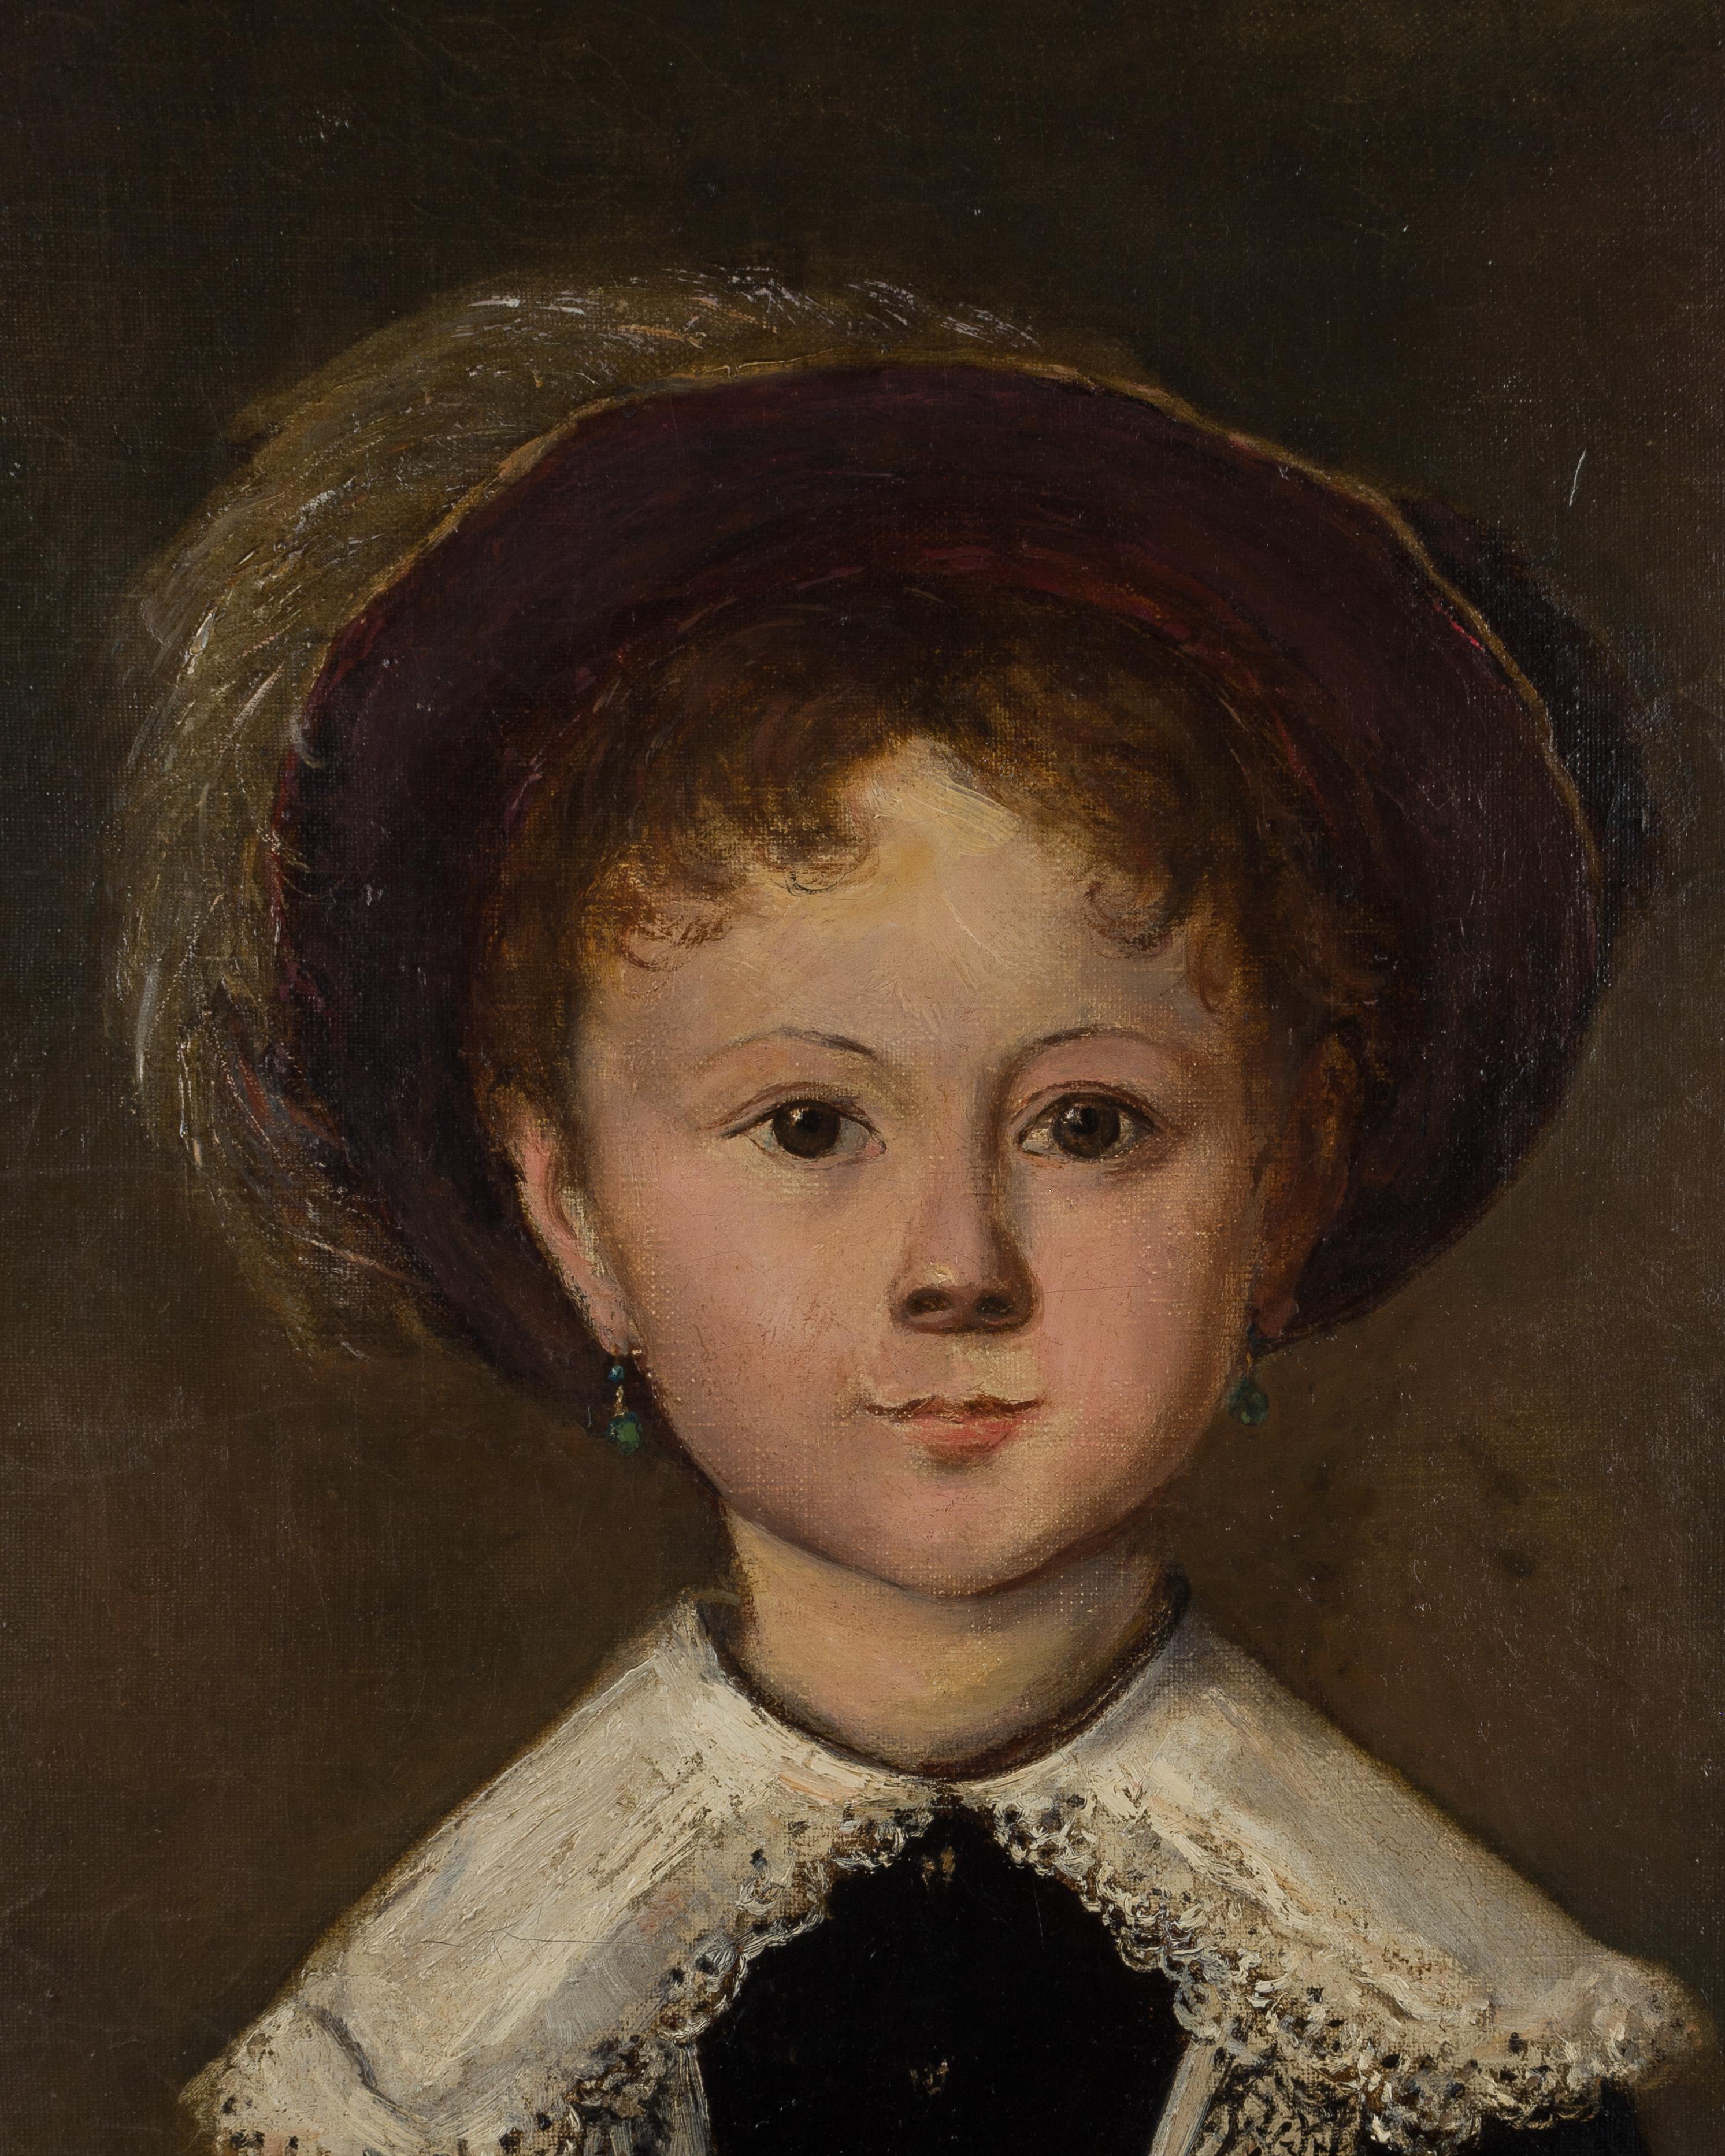 A 19th century French impressionist portrait of a young girl, elegantly dressed and holding her play hoop and stick. The artist beautifully captures her sweet expression and fine clothing. She wears a lace trimmed dark velvet coat and a hat with a